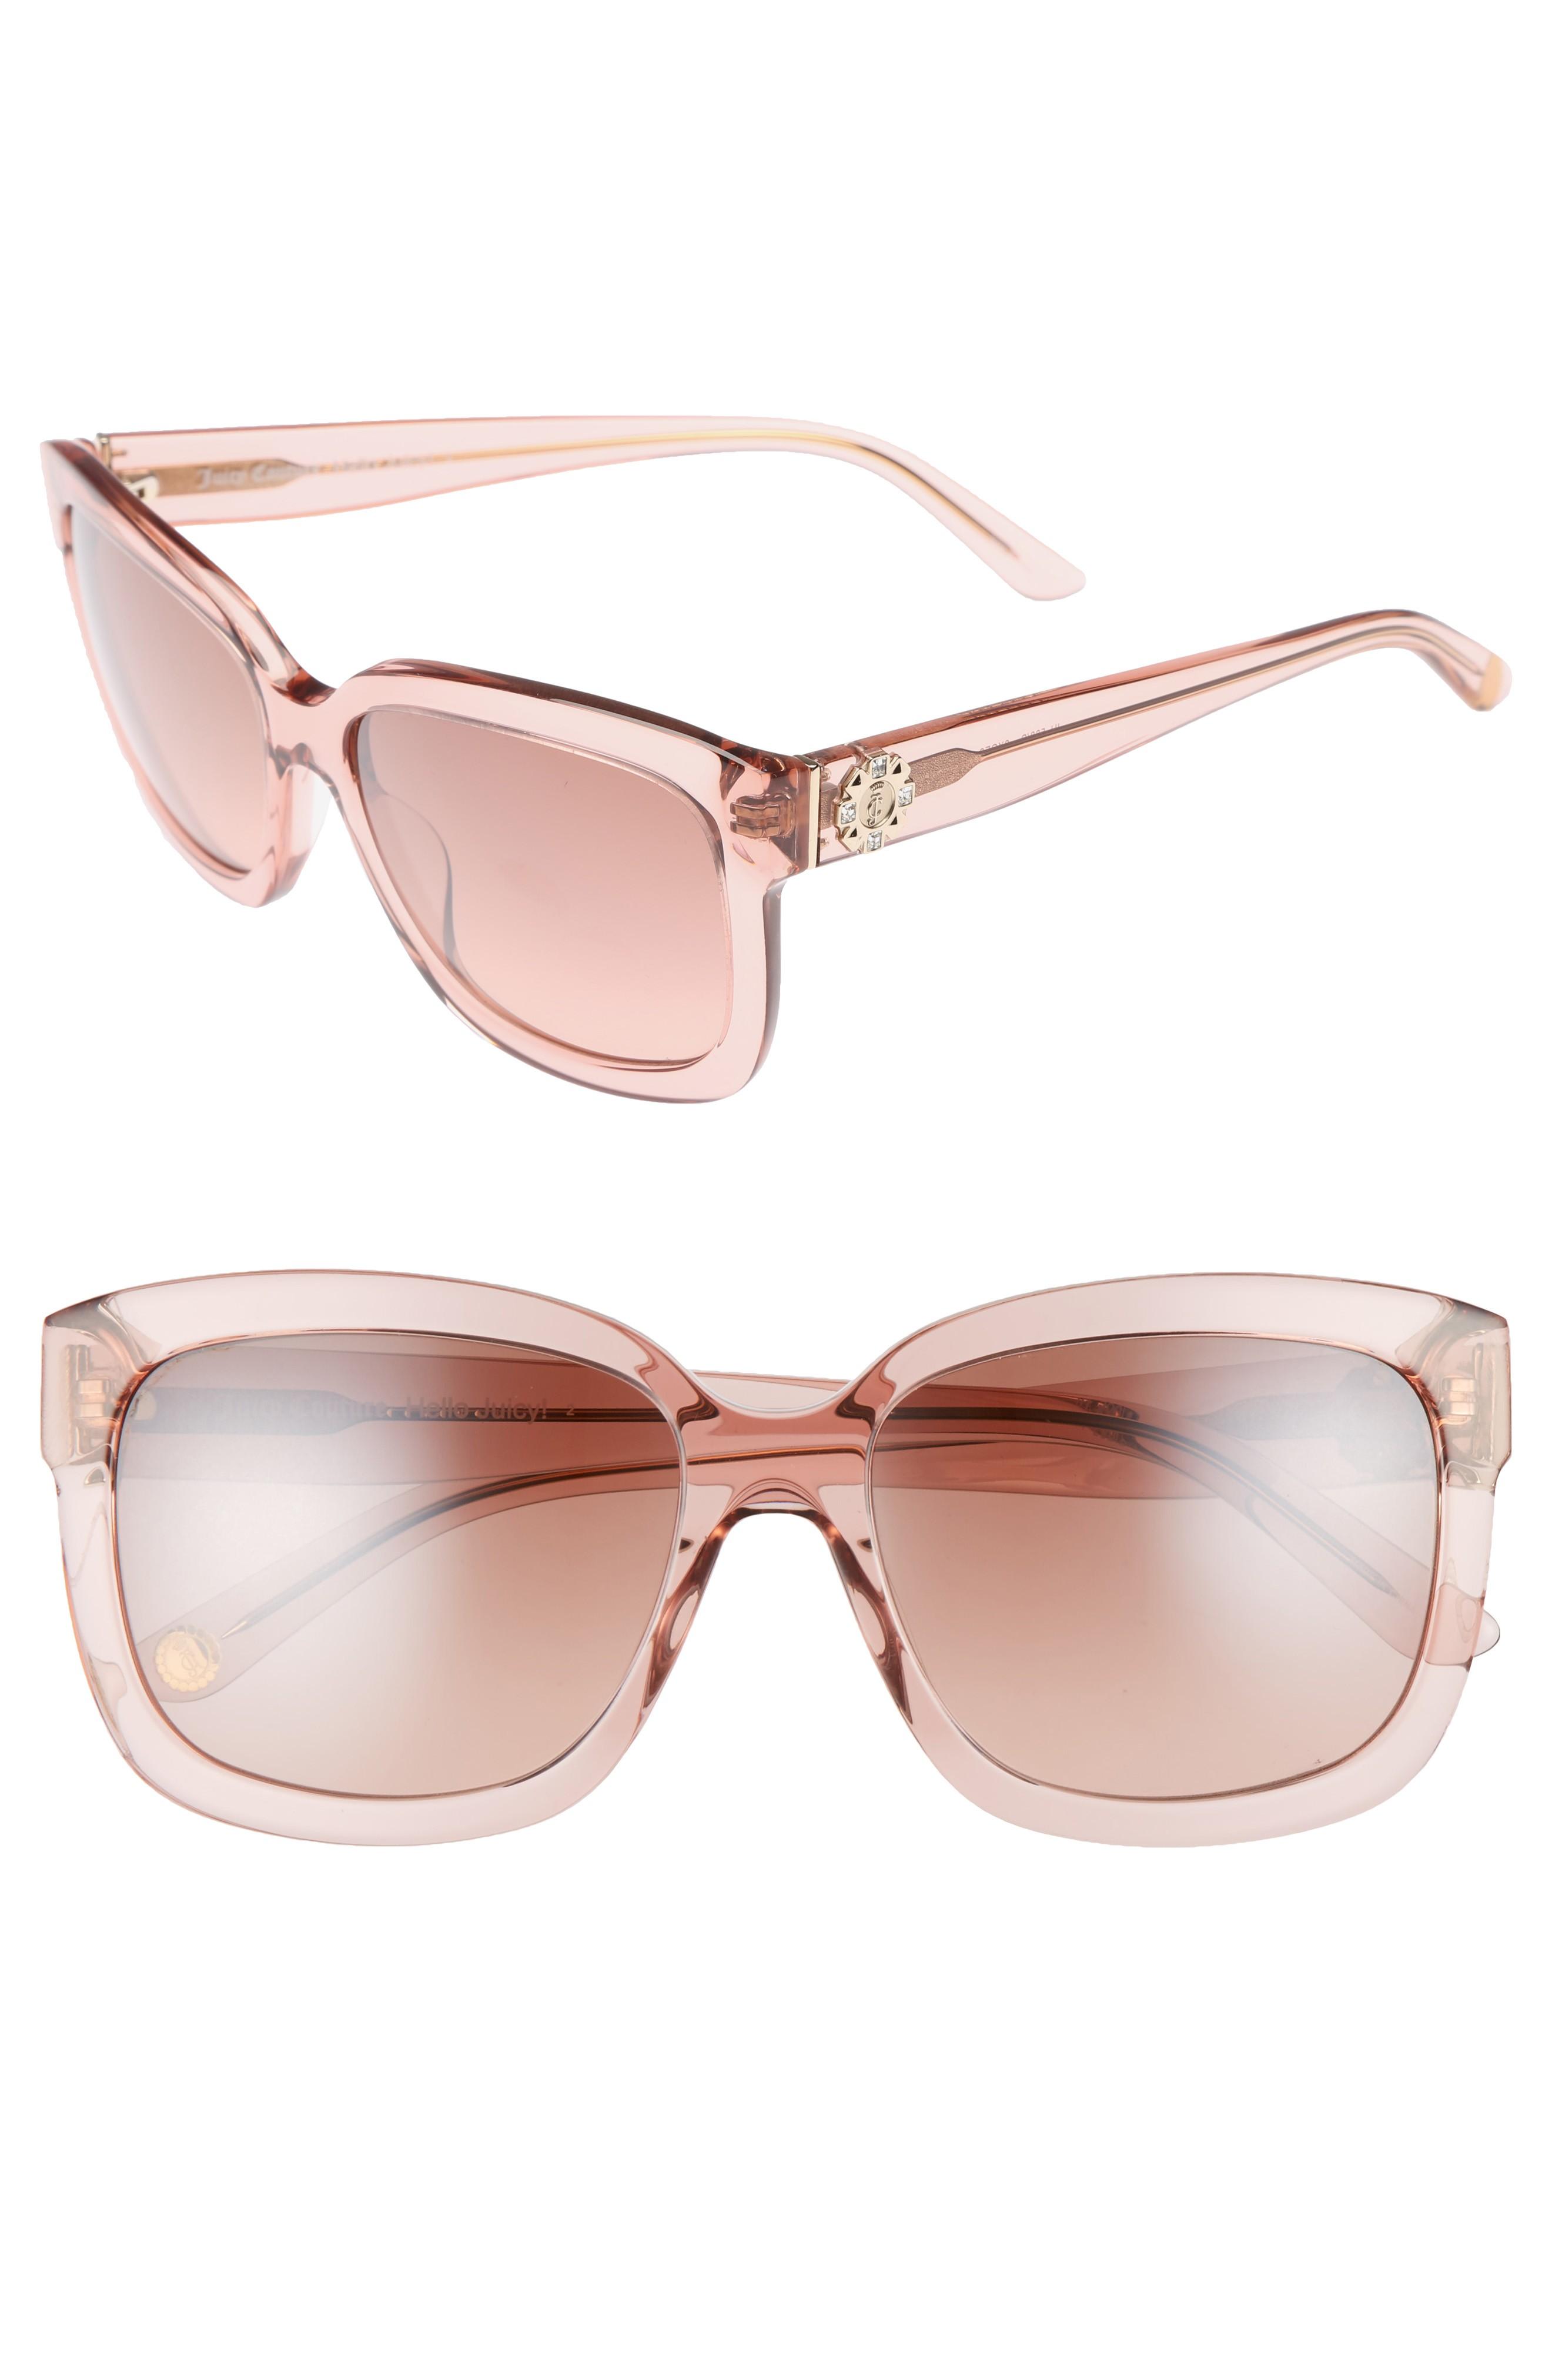 Juicy Couture Black Label 55mm Square Sunglasses - Pink Crystal | ModeSens